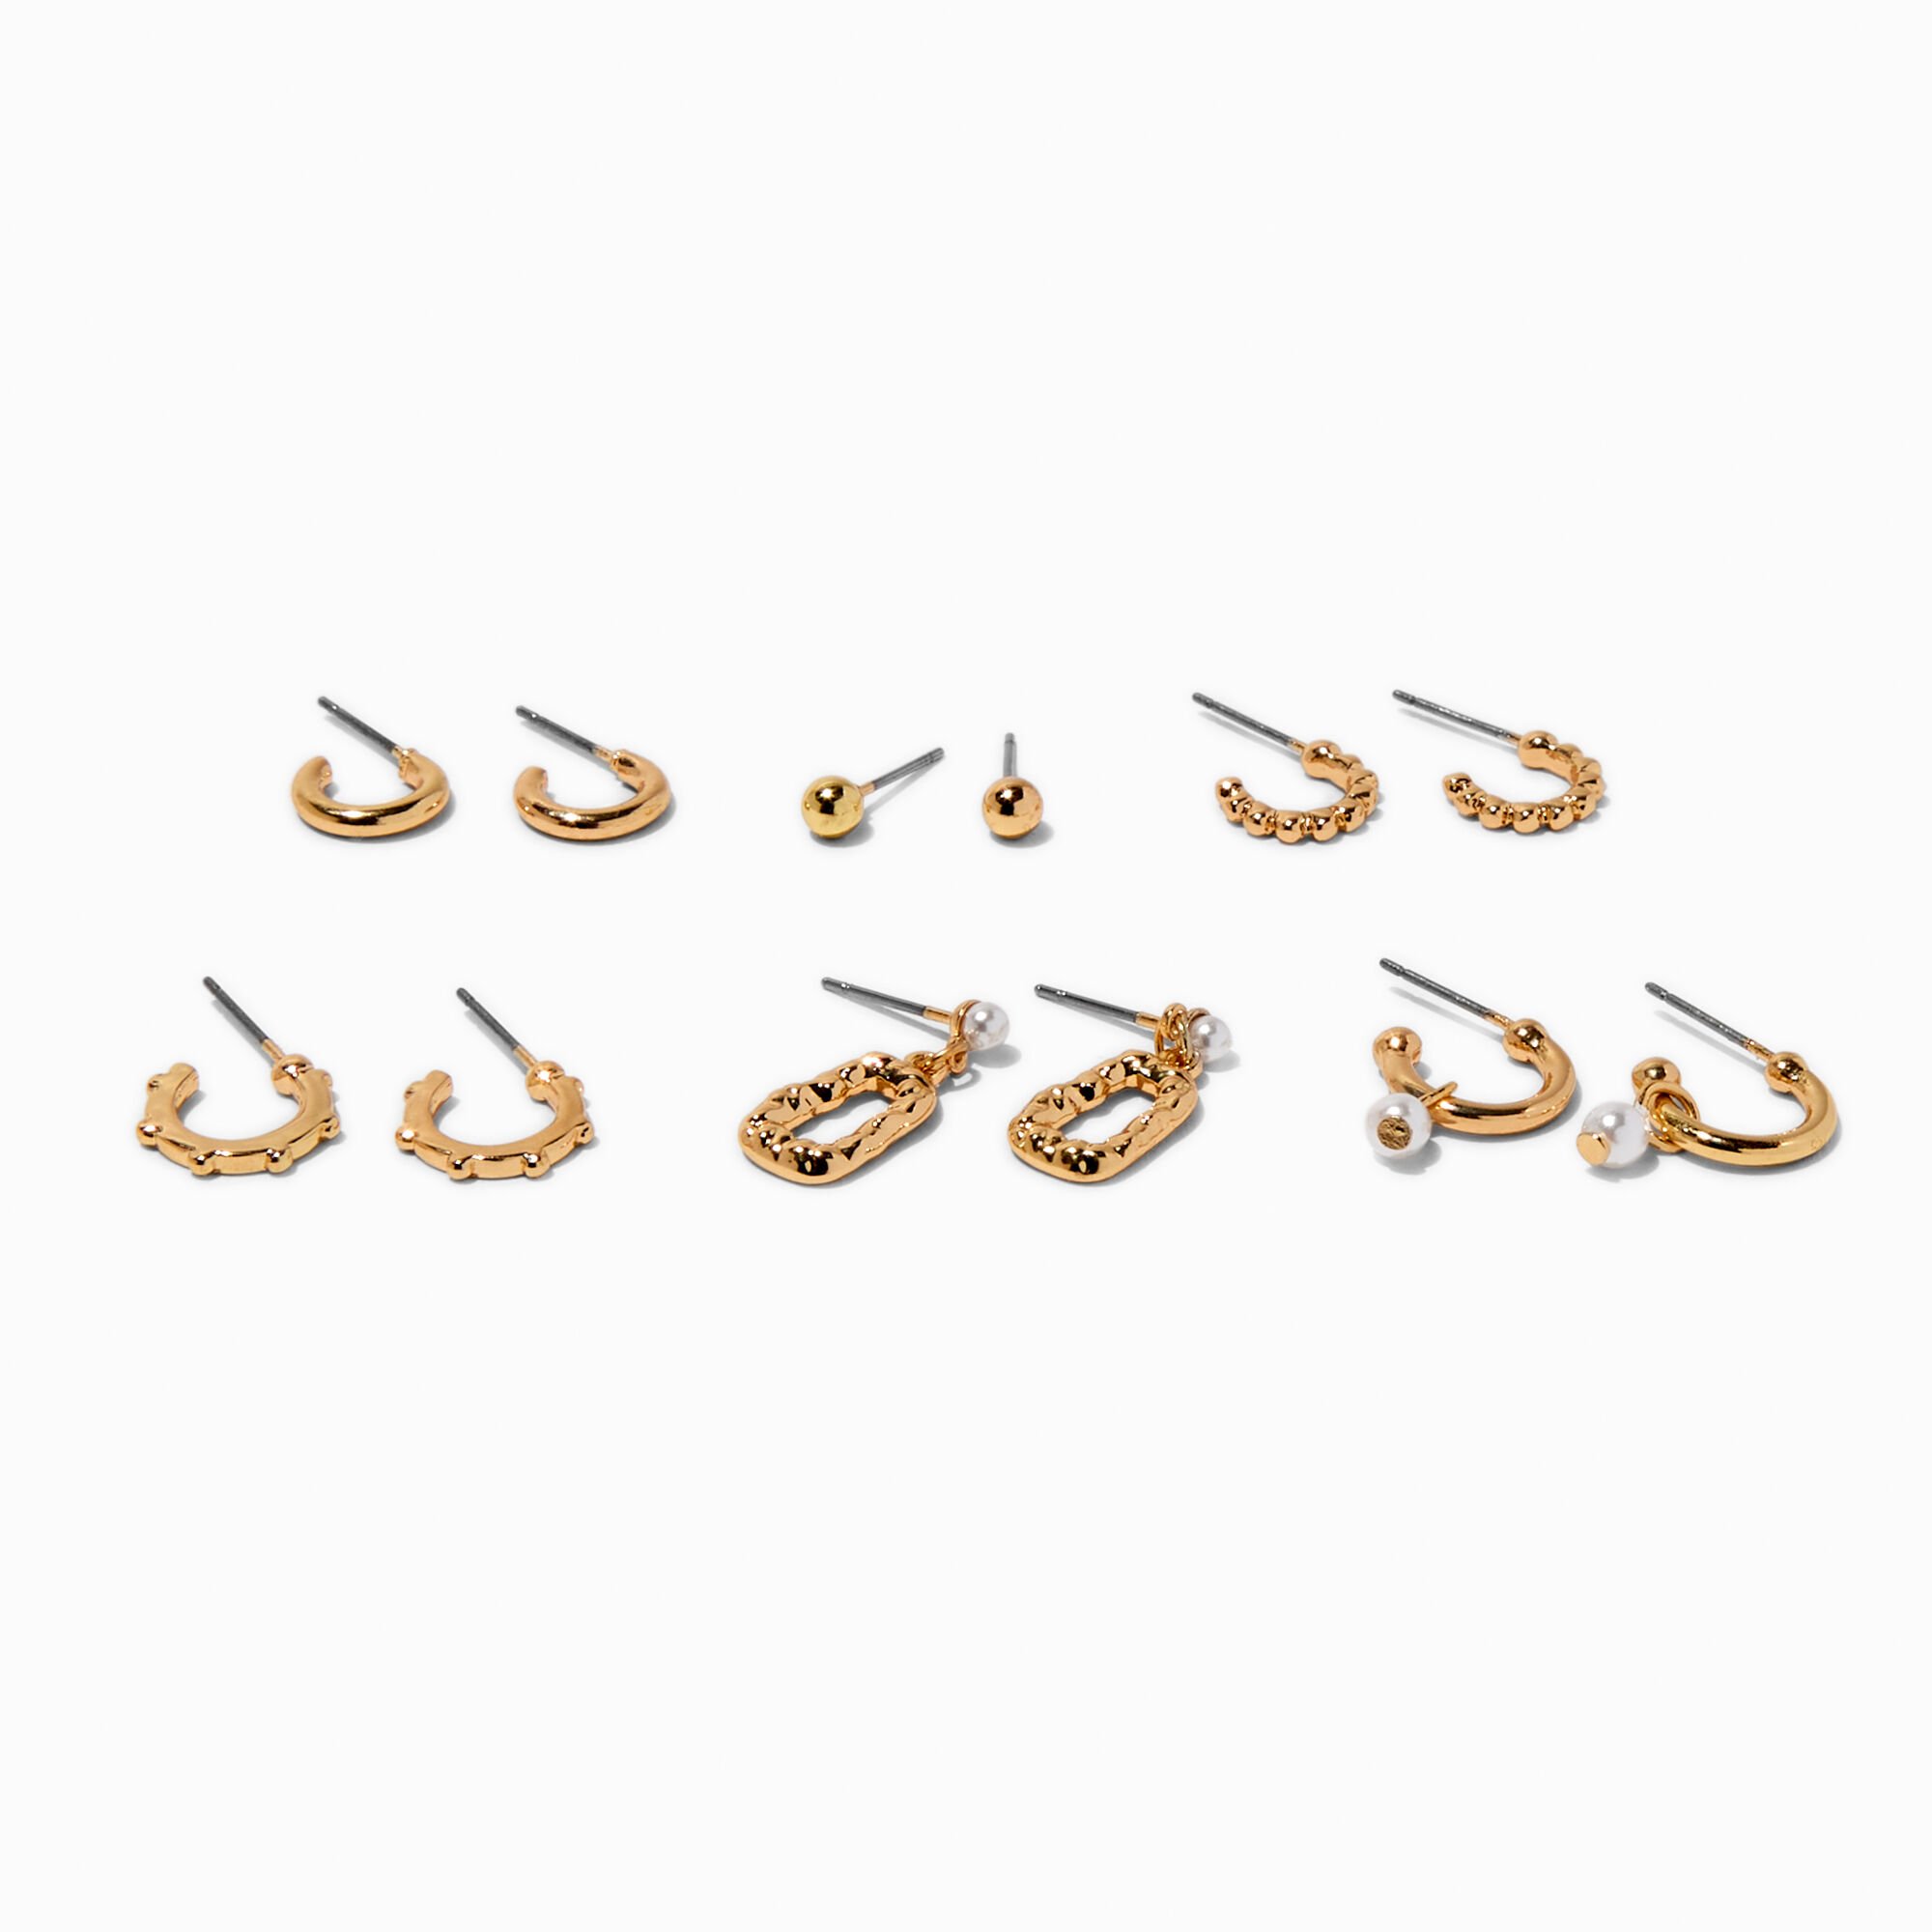 View Claires Tone Pearl Hoop Earring Stackables Set 6 Pack Gold information